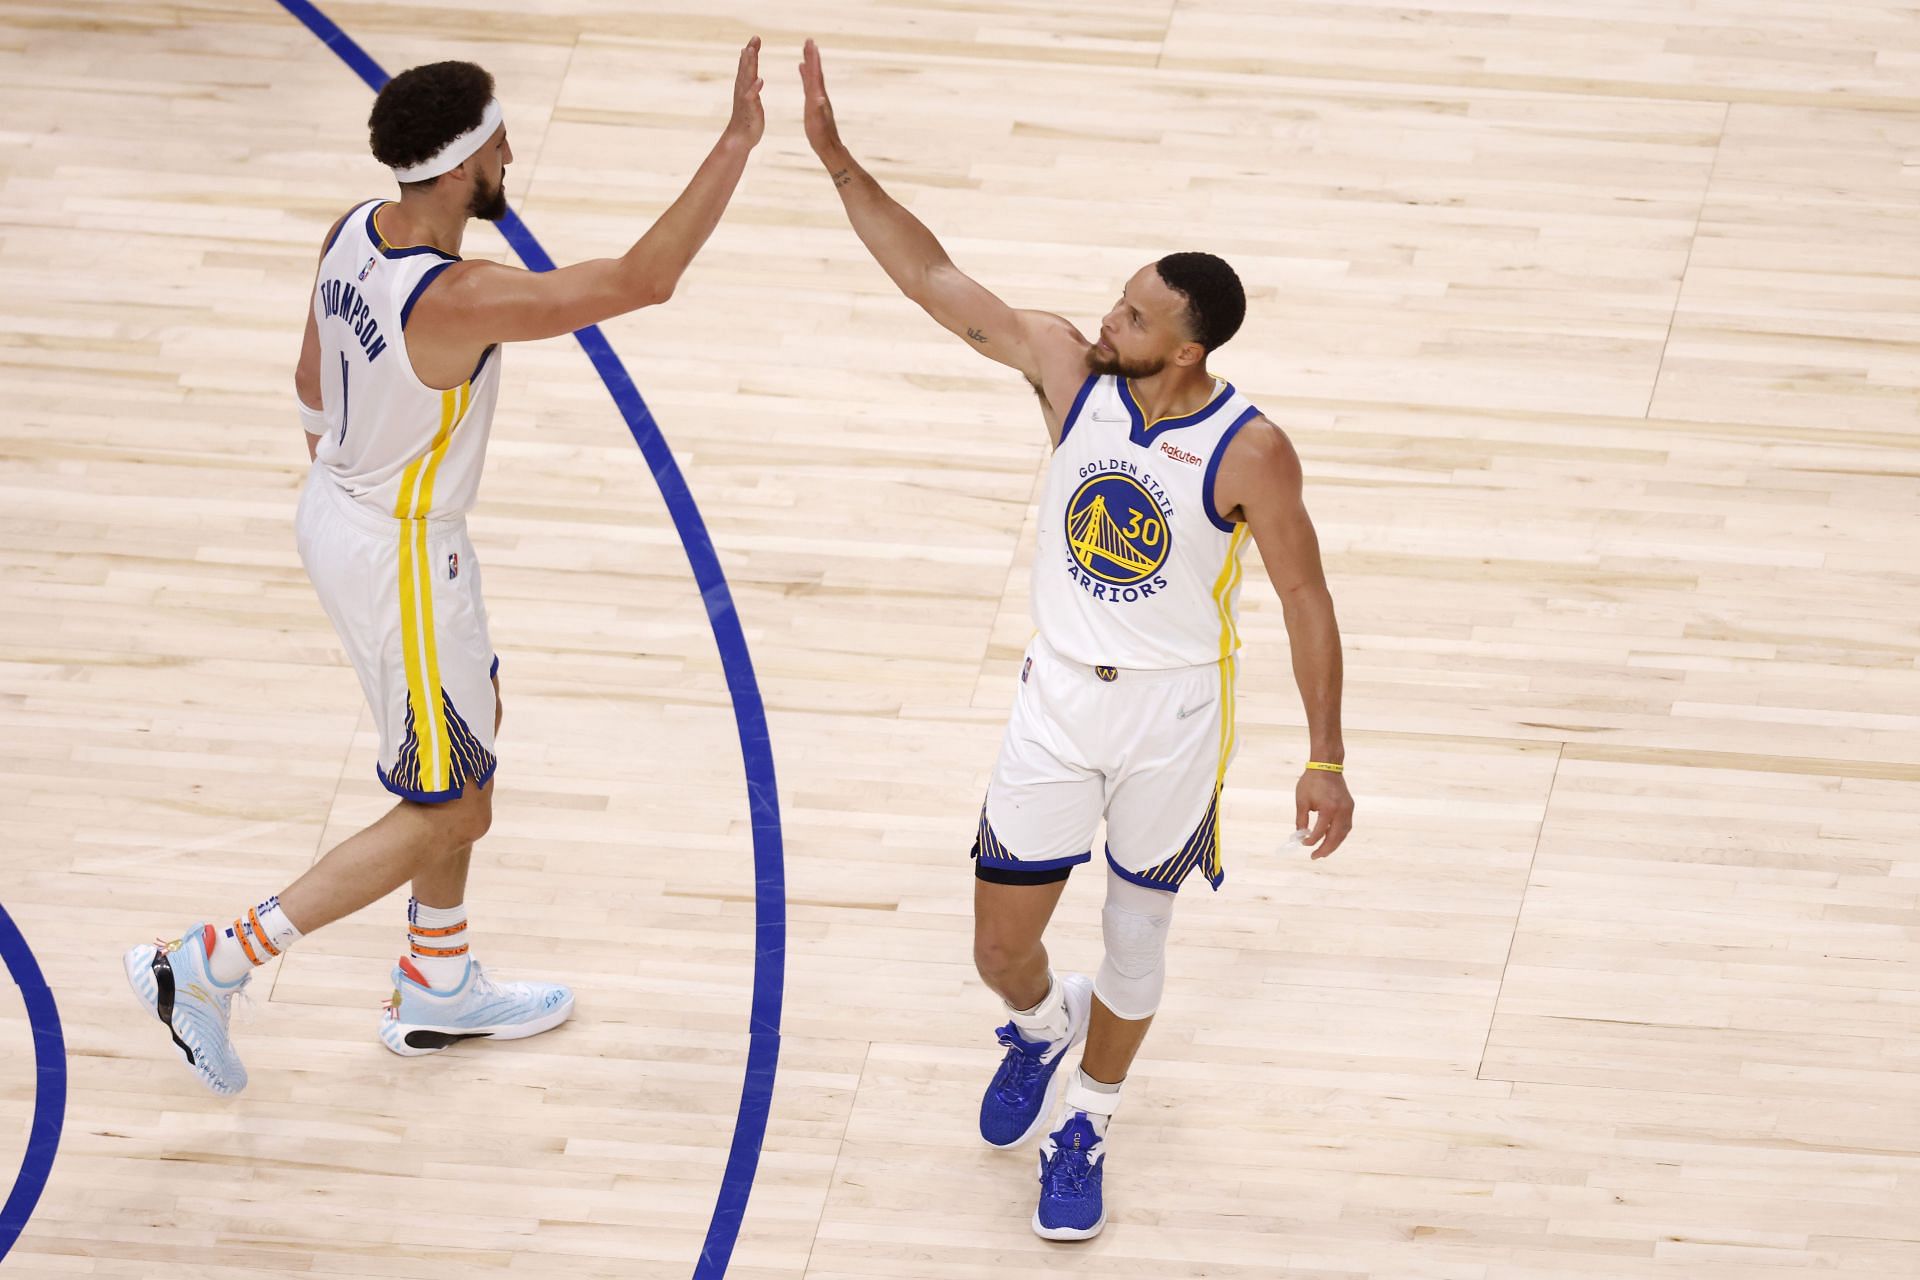 Stephen Curry and Klay Thompson of the Golden State Warriors in the Western Conference Finals